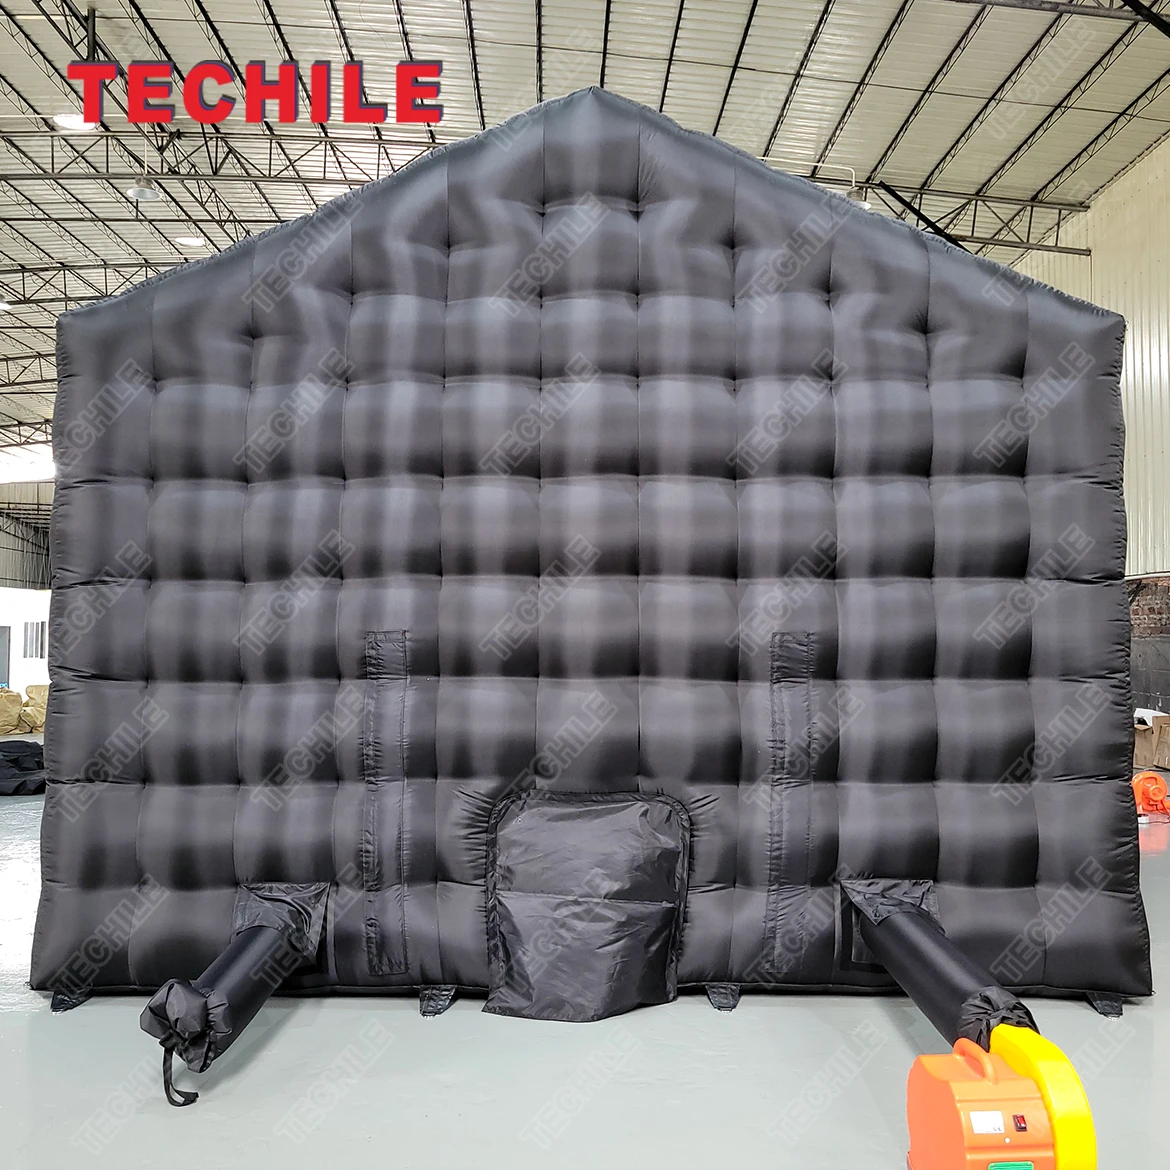 free air shipping to door,5x4m inflatable nightclub tent, outdoor portable  inflatable bar cabin disco nightclub pub tent - AliExpress